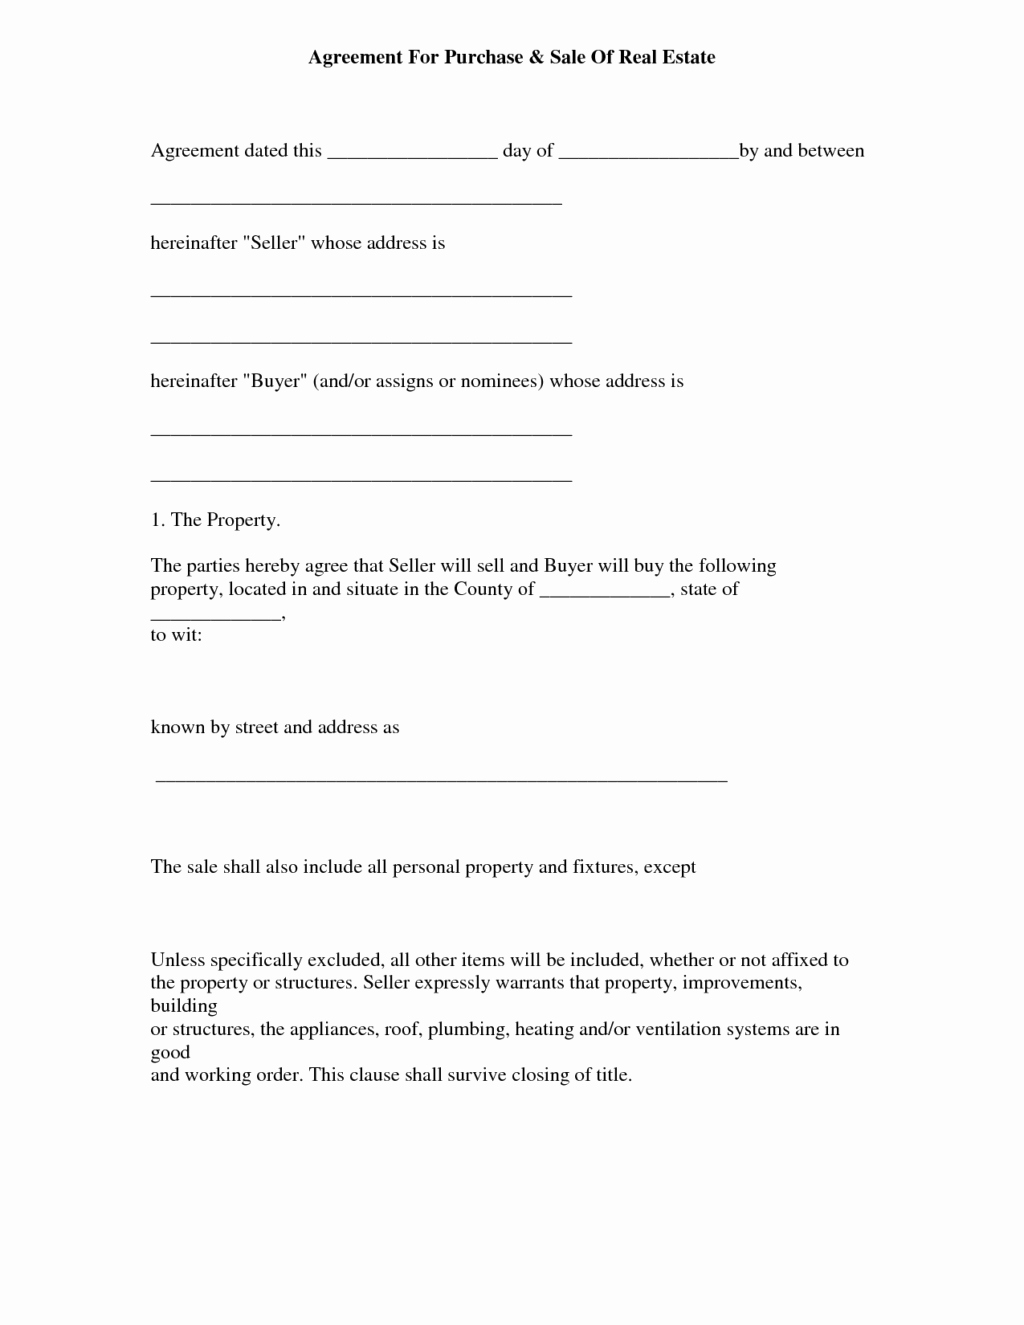 Simple Purchase Agreement Template Unique Contract Purchase Sale Agreement form Sample for Real